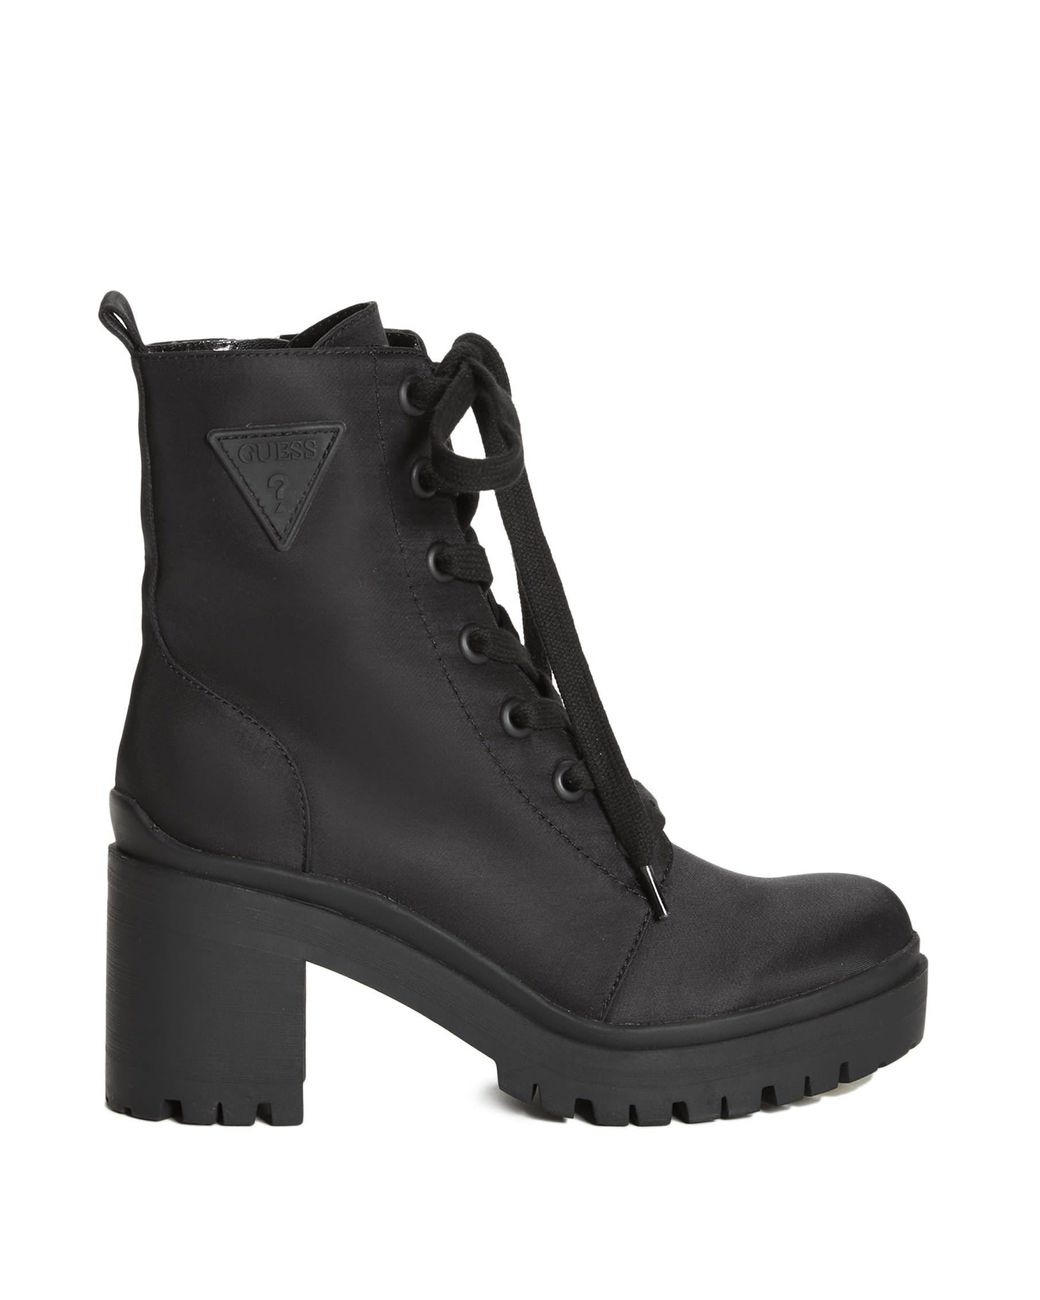 Guess Factory Quincy Nylon Heeled Booties in Black | Lyst